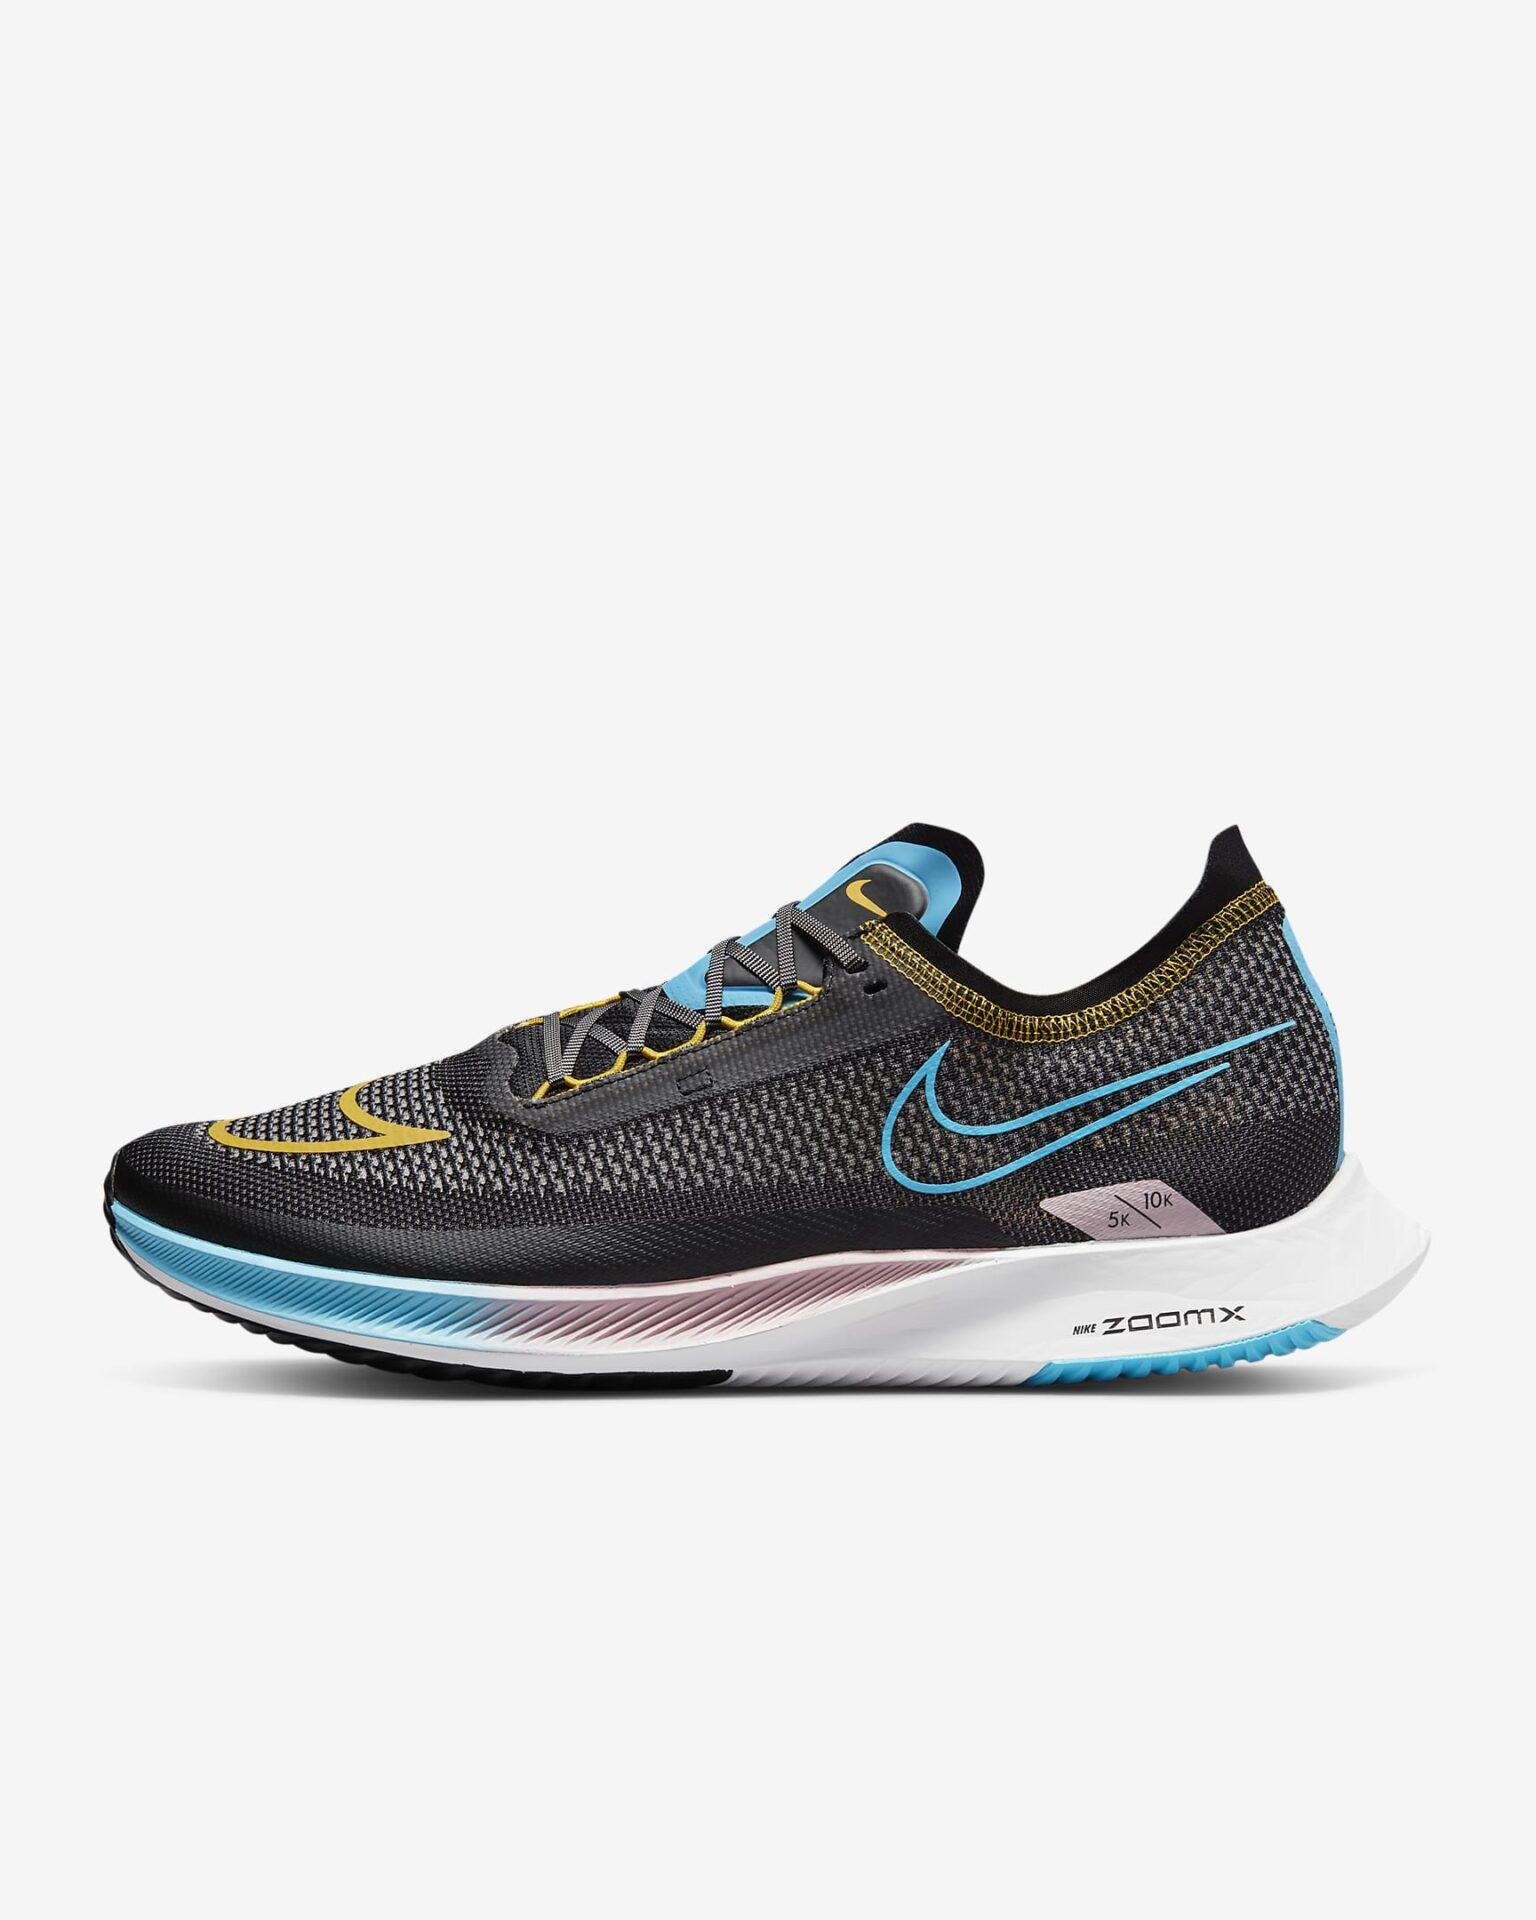 NIKE zoomX-streakfly-road-racing - Live Life Egypt